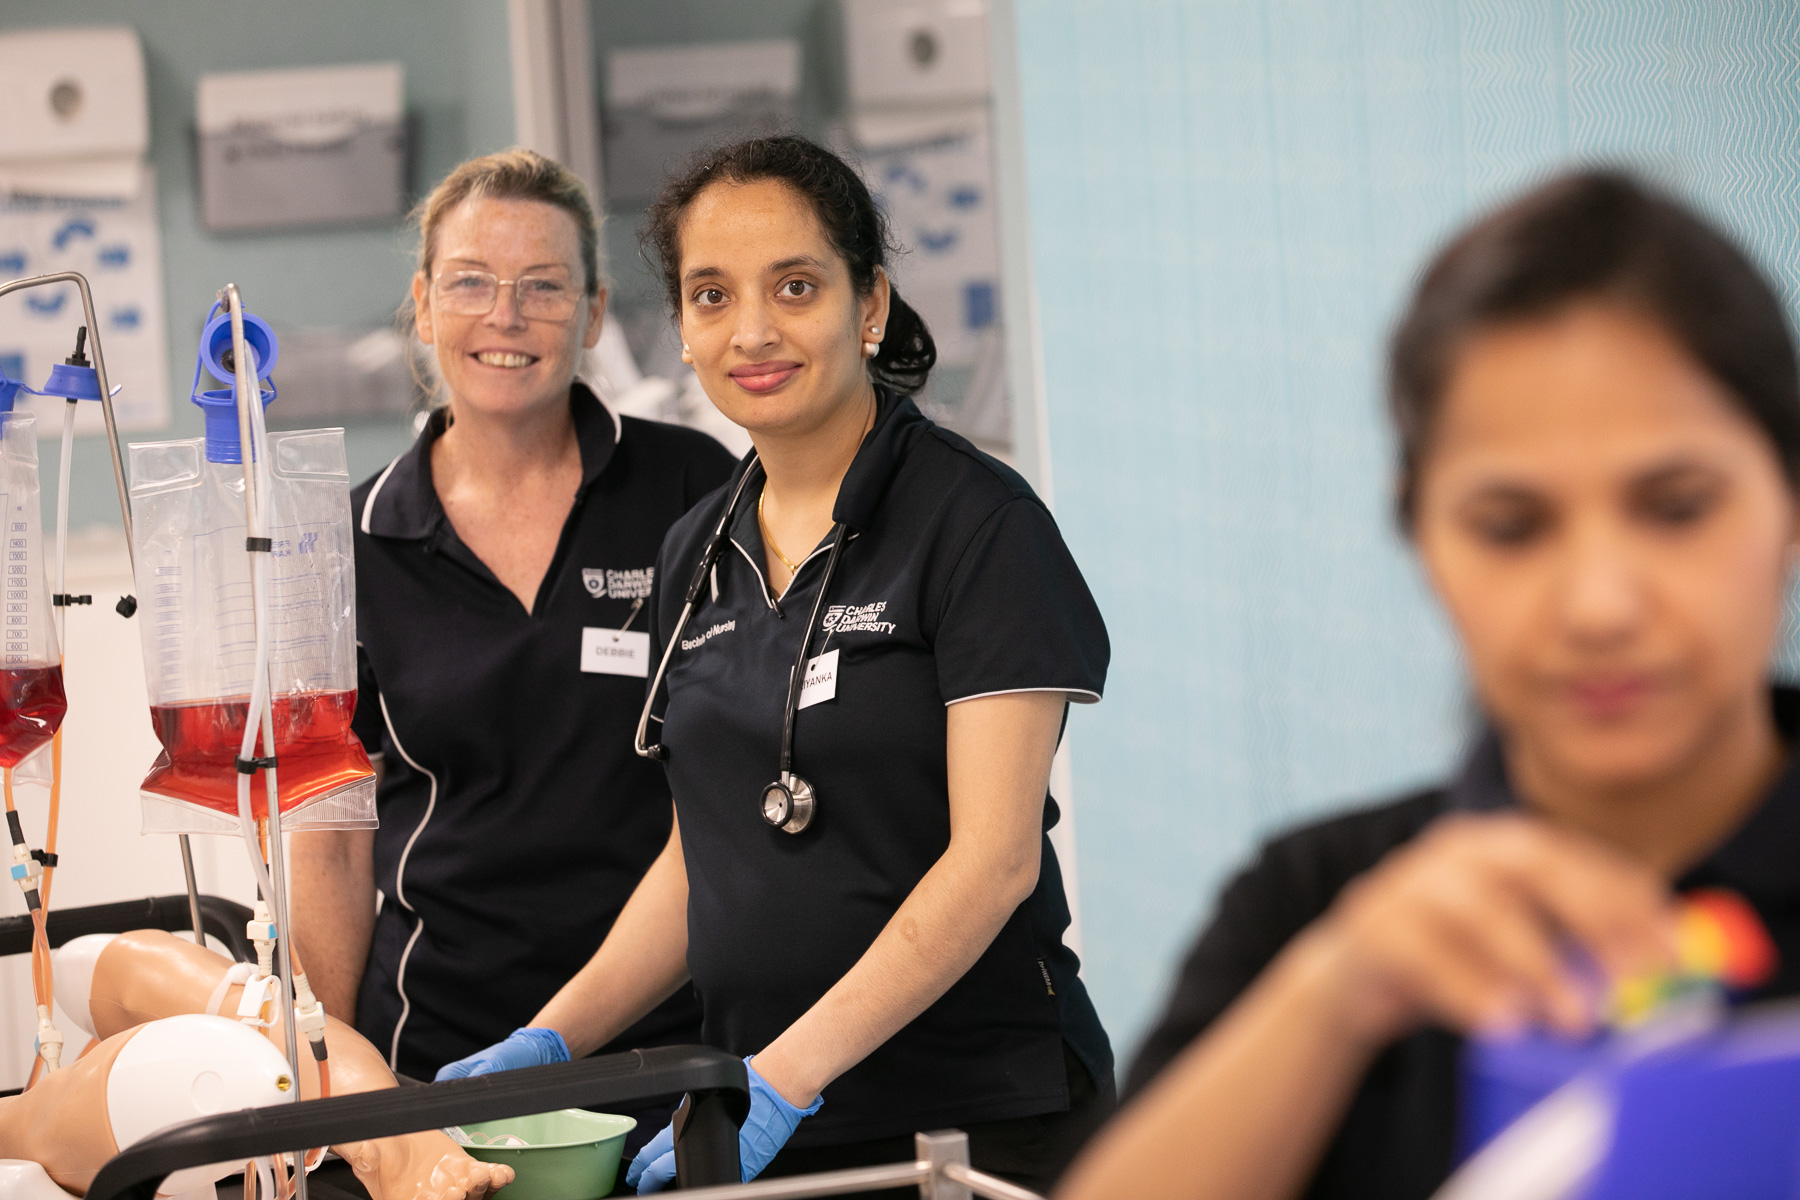 Learn More About a Top Australia Nursing Programme at Charles Darwin University!